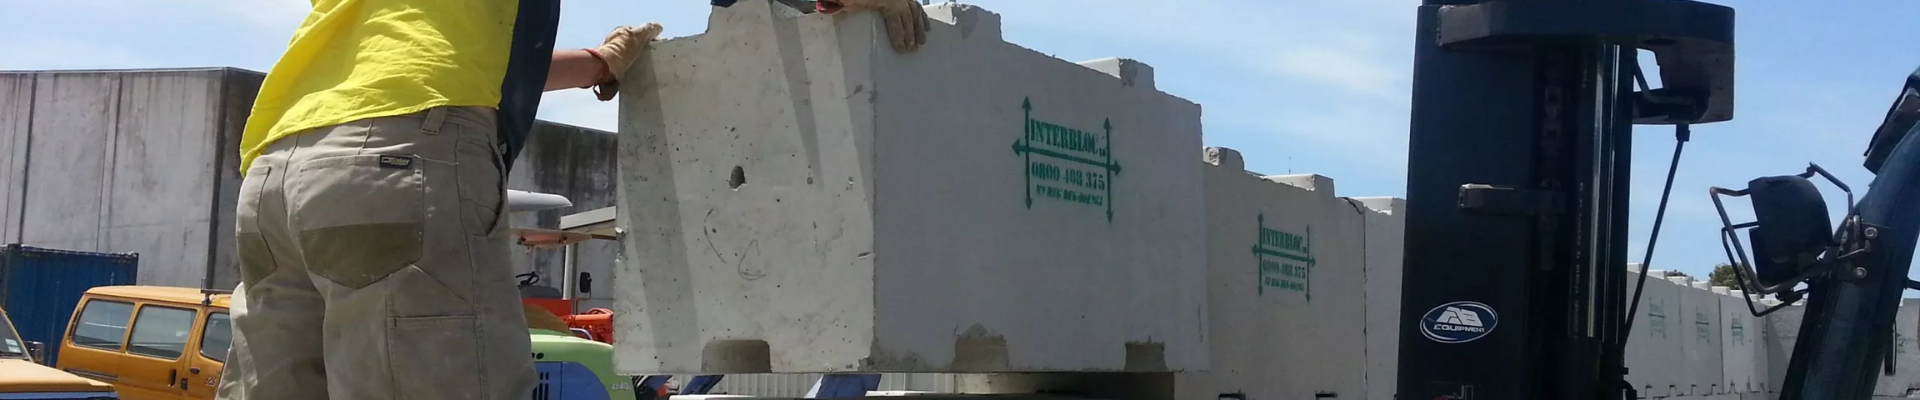 Worker installing a standard 1200 Interbloc concrete block on top of the already-built 2 rows underneath.